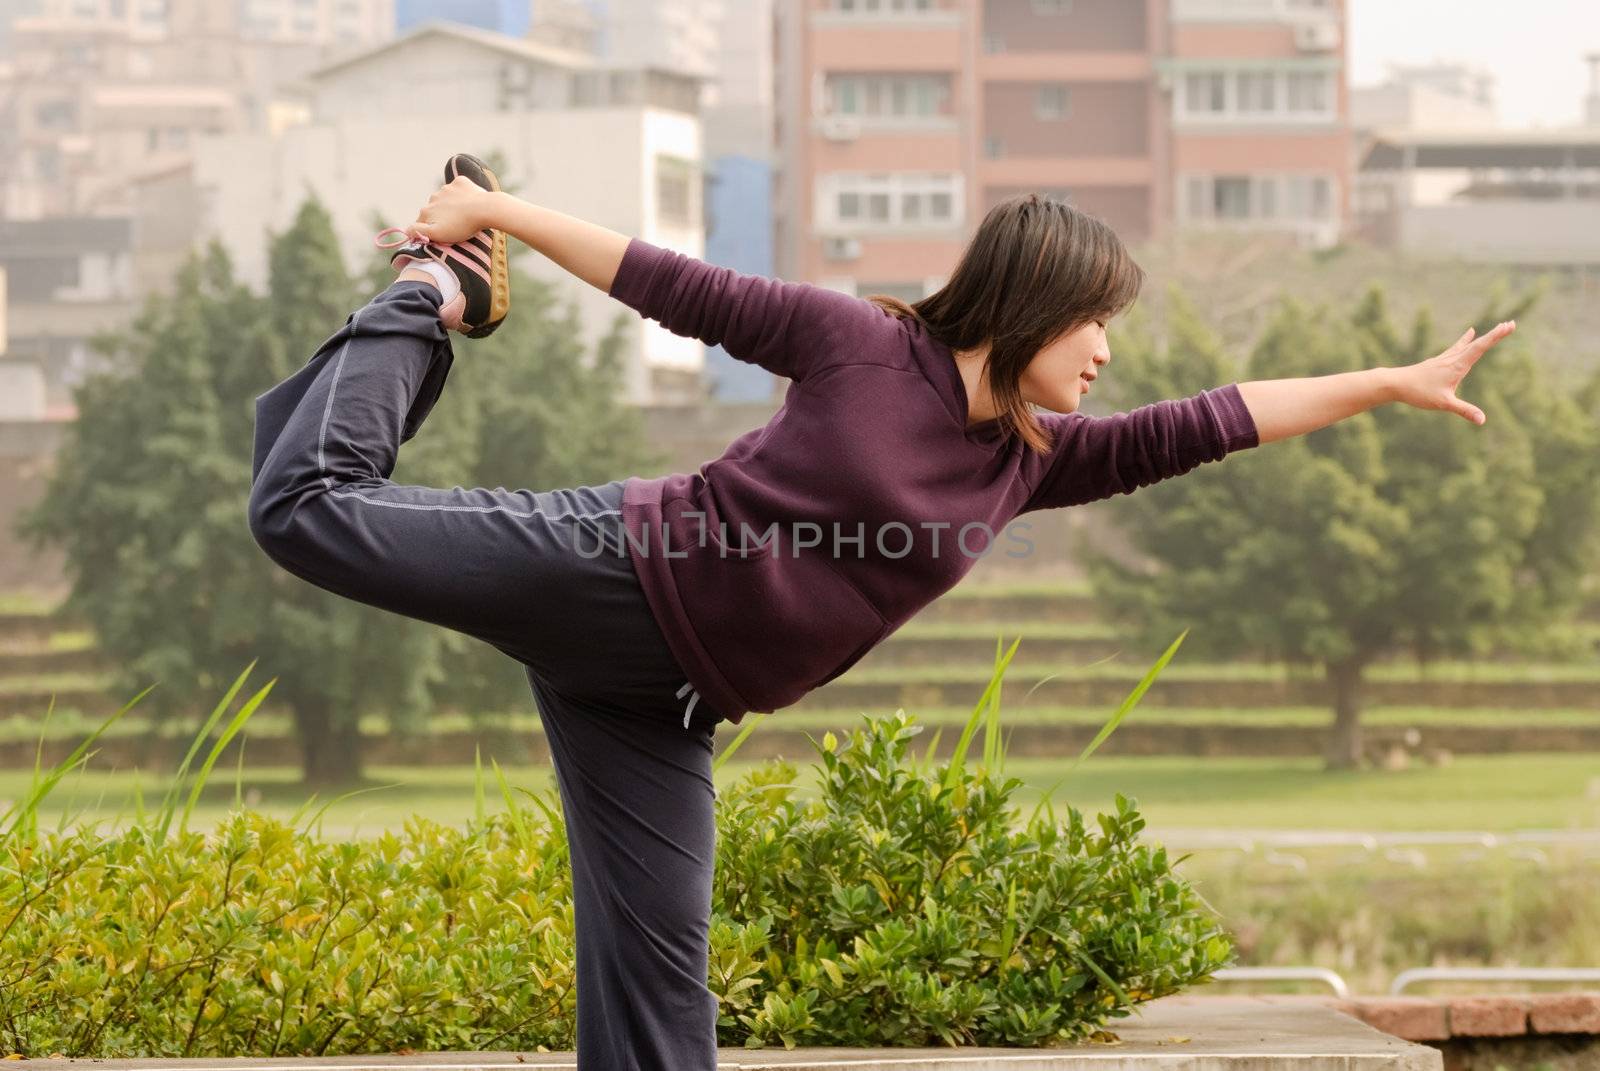 Yoga excise of Asian woman in outdoor of park in city.